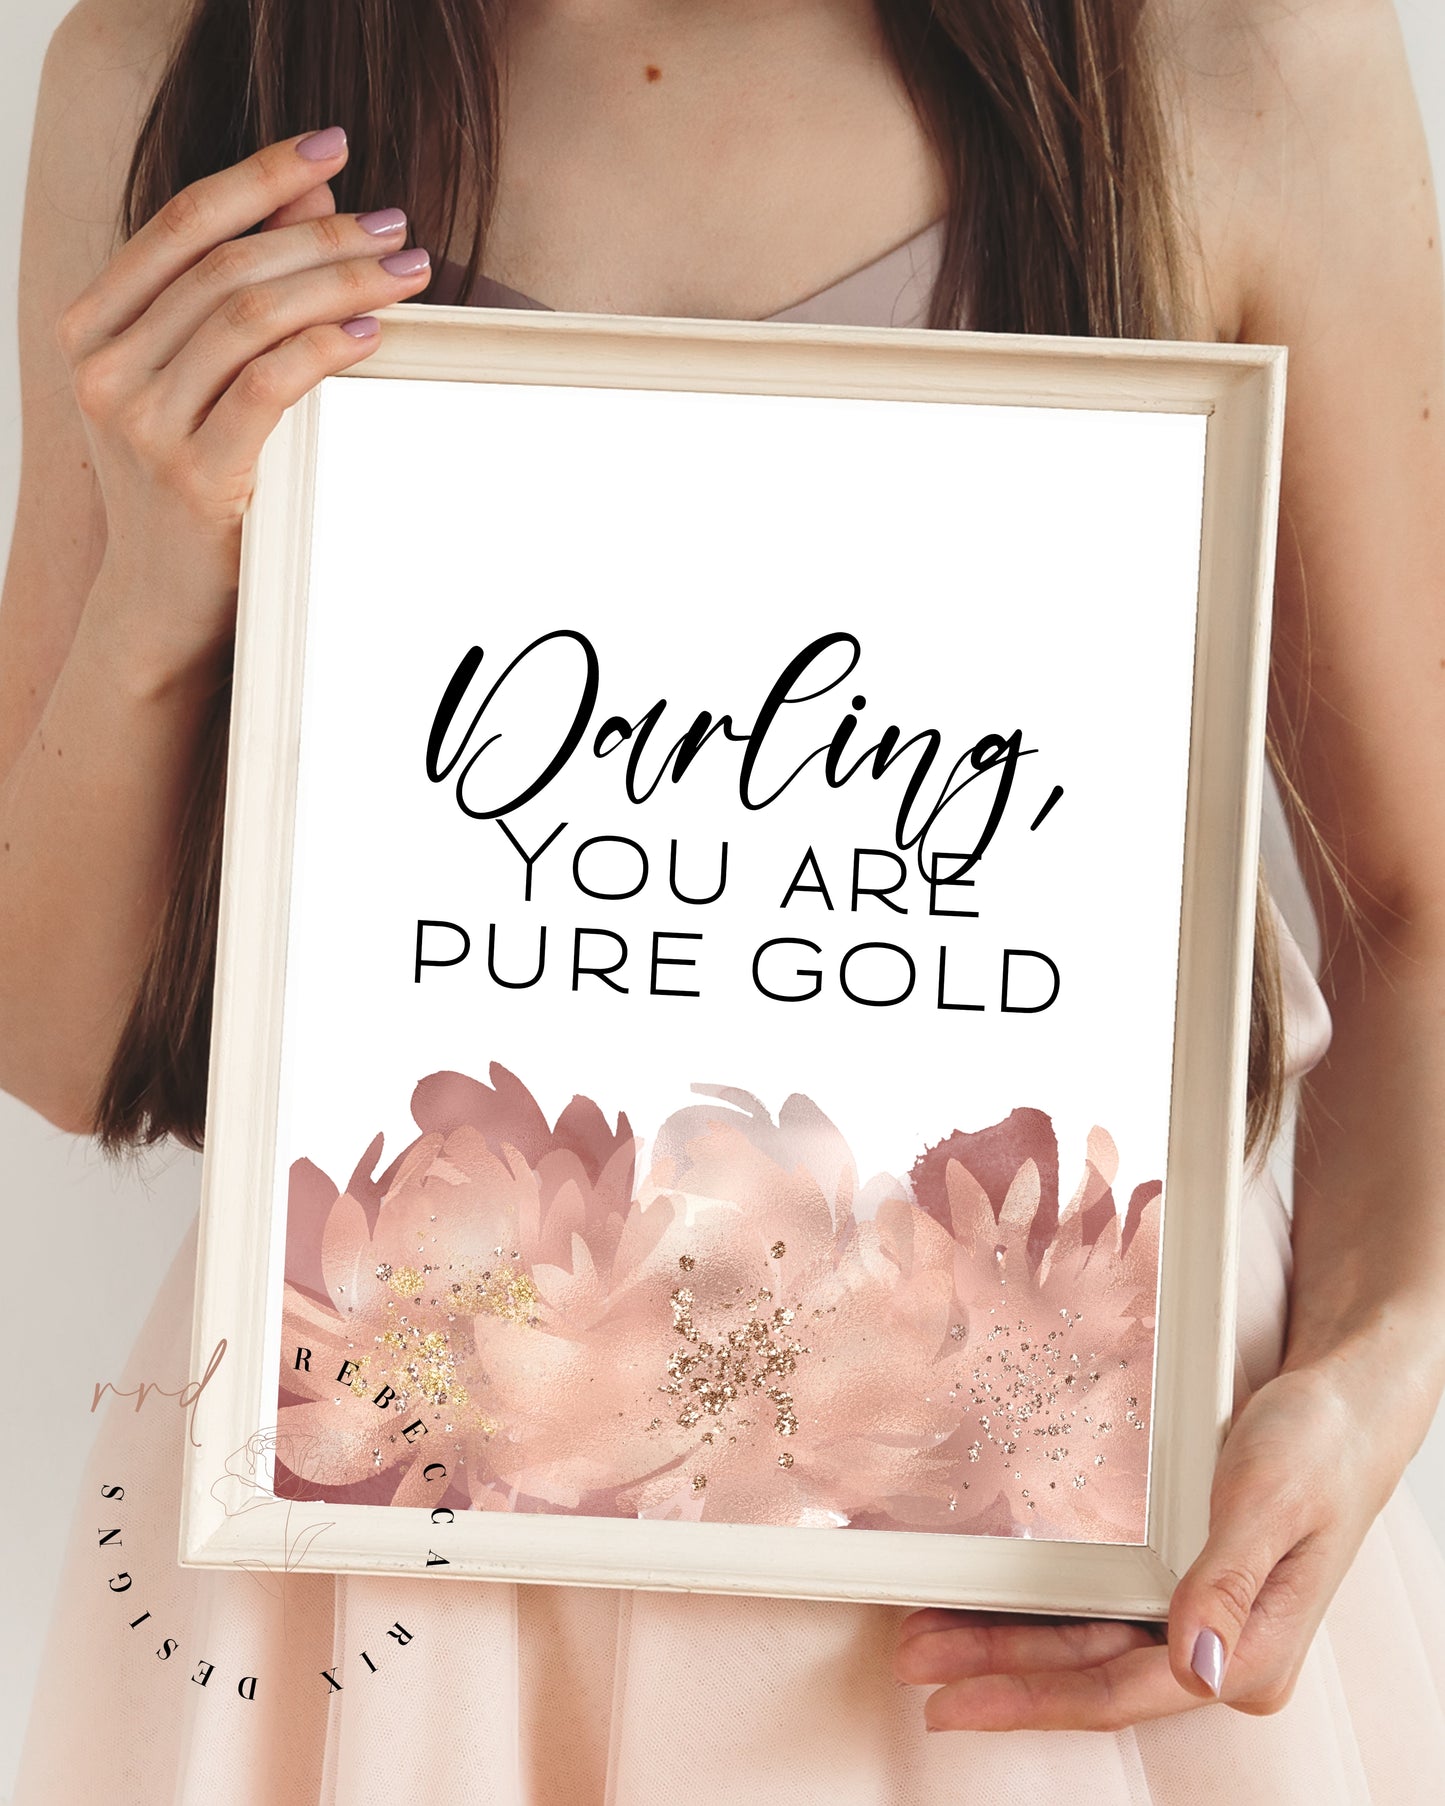 "Darling You Are Pure Gold" Motivational & Inspirational Quote For Girls, Printable Wall Art